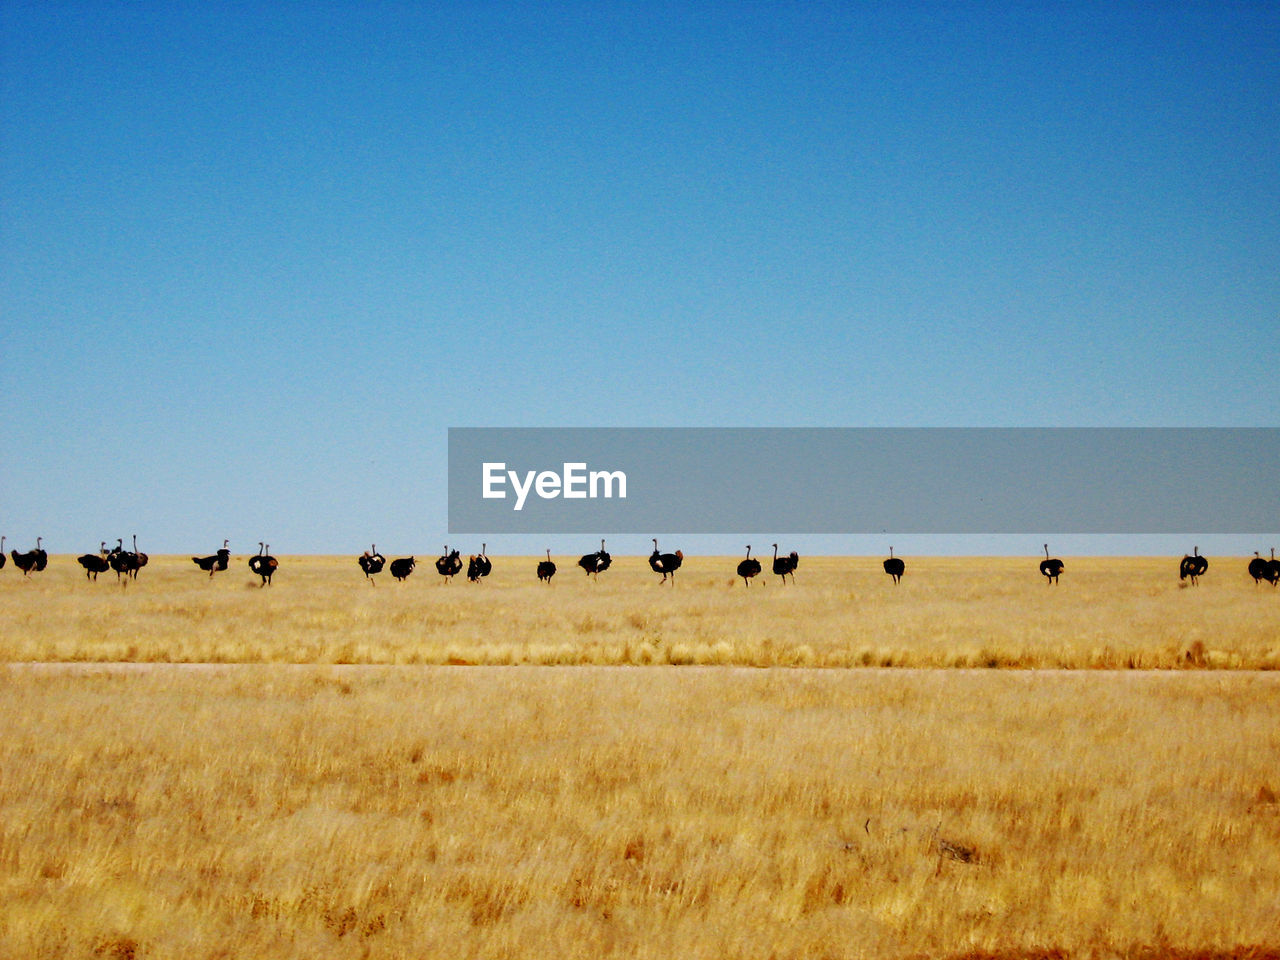 View of ostriches in field against clear blue sky